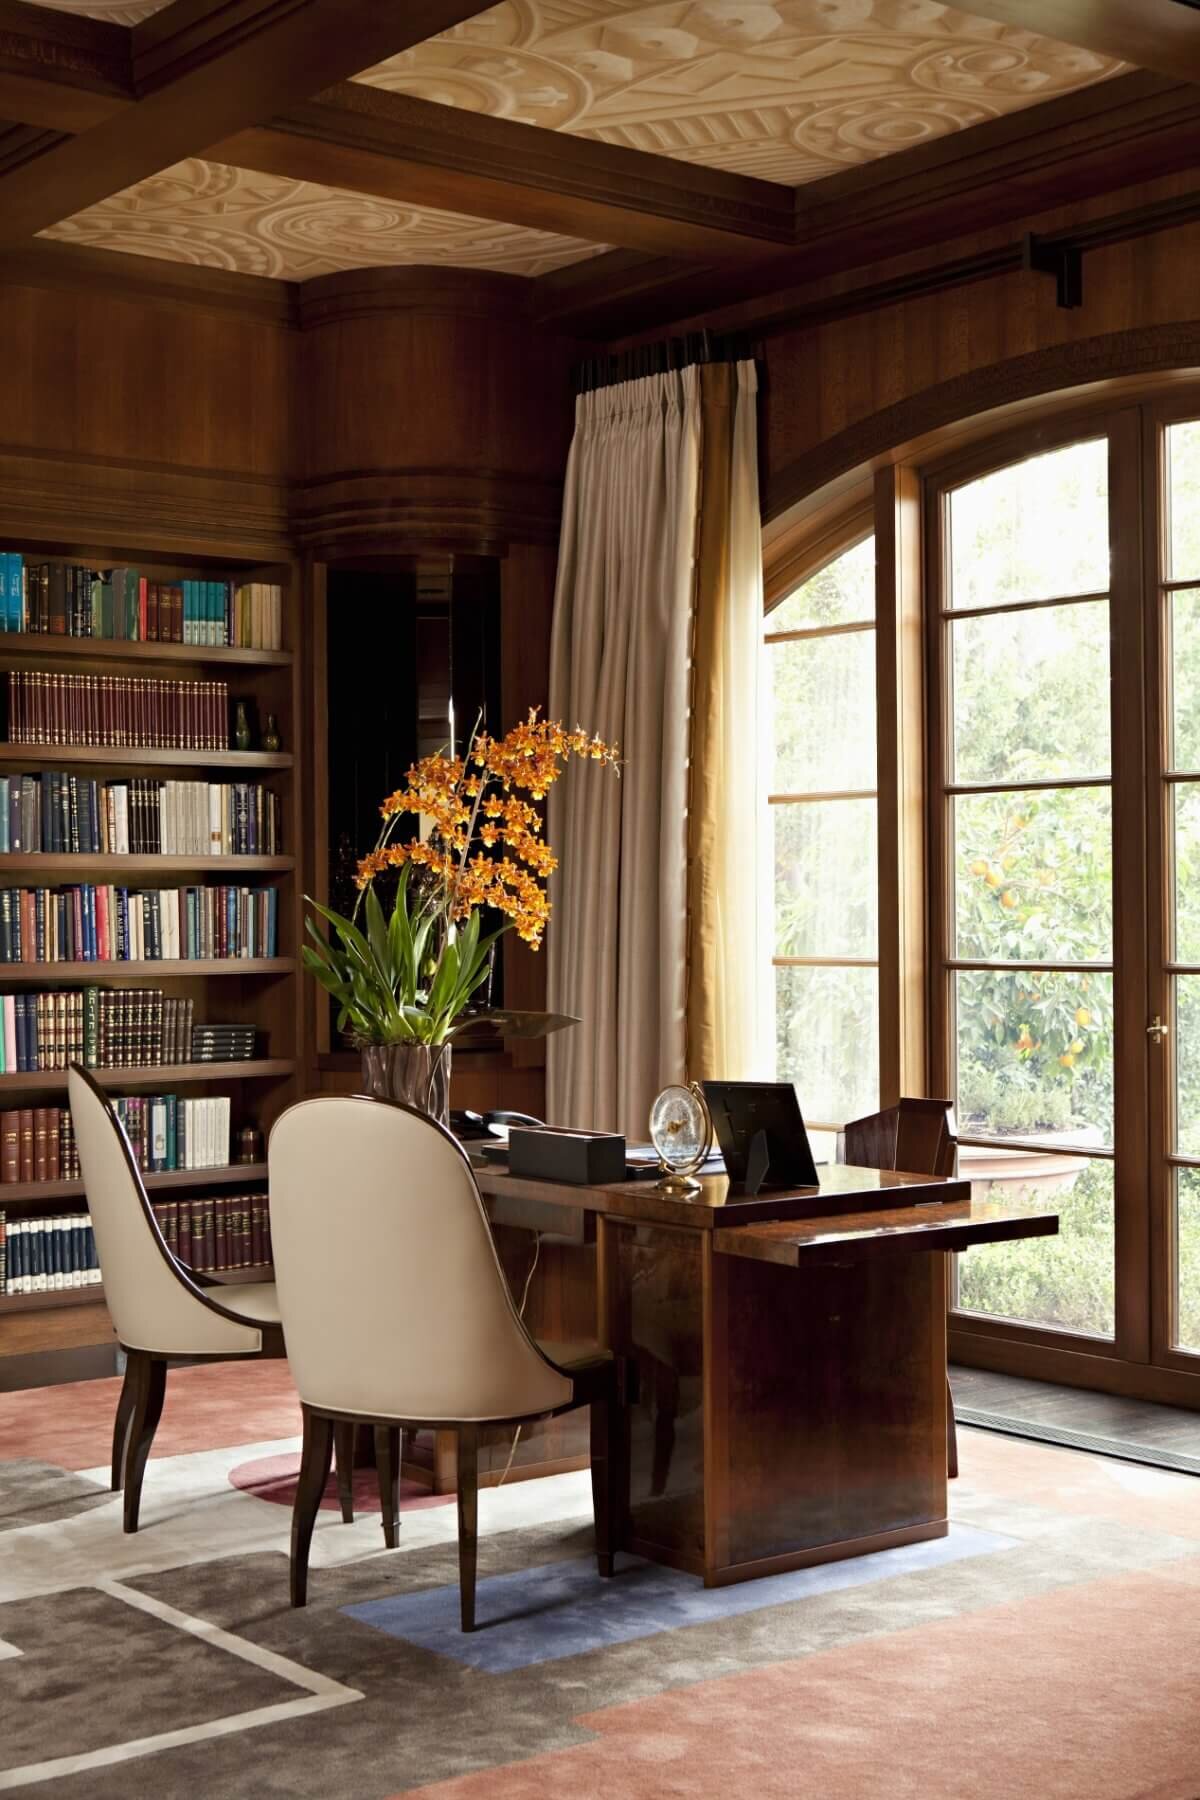 His Office with soffit ceilings, walnut woodwork, custom drapery and an arch window